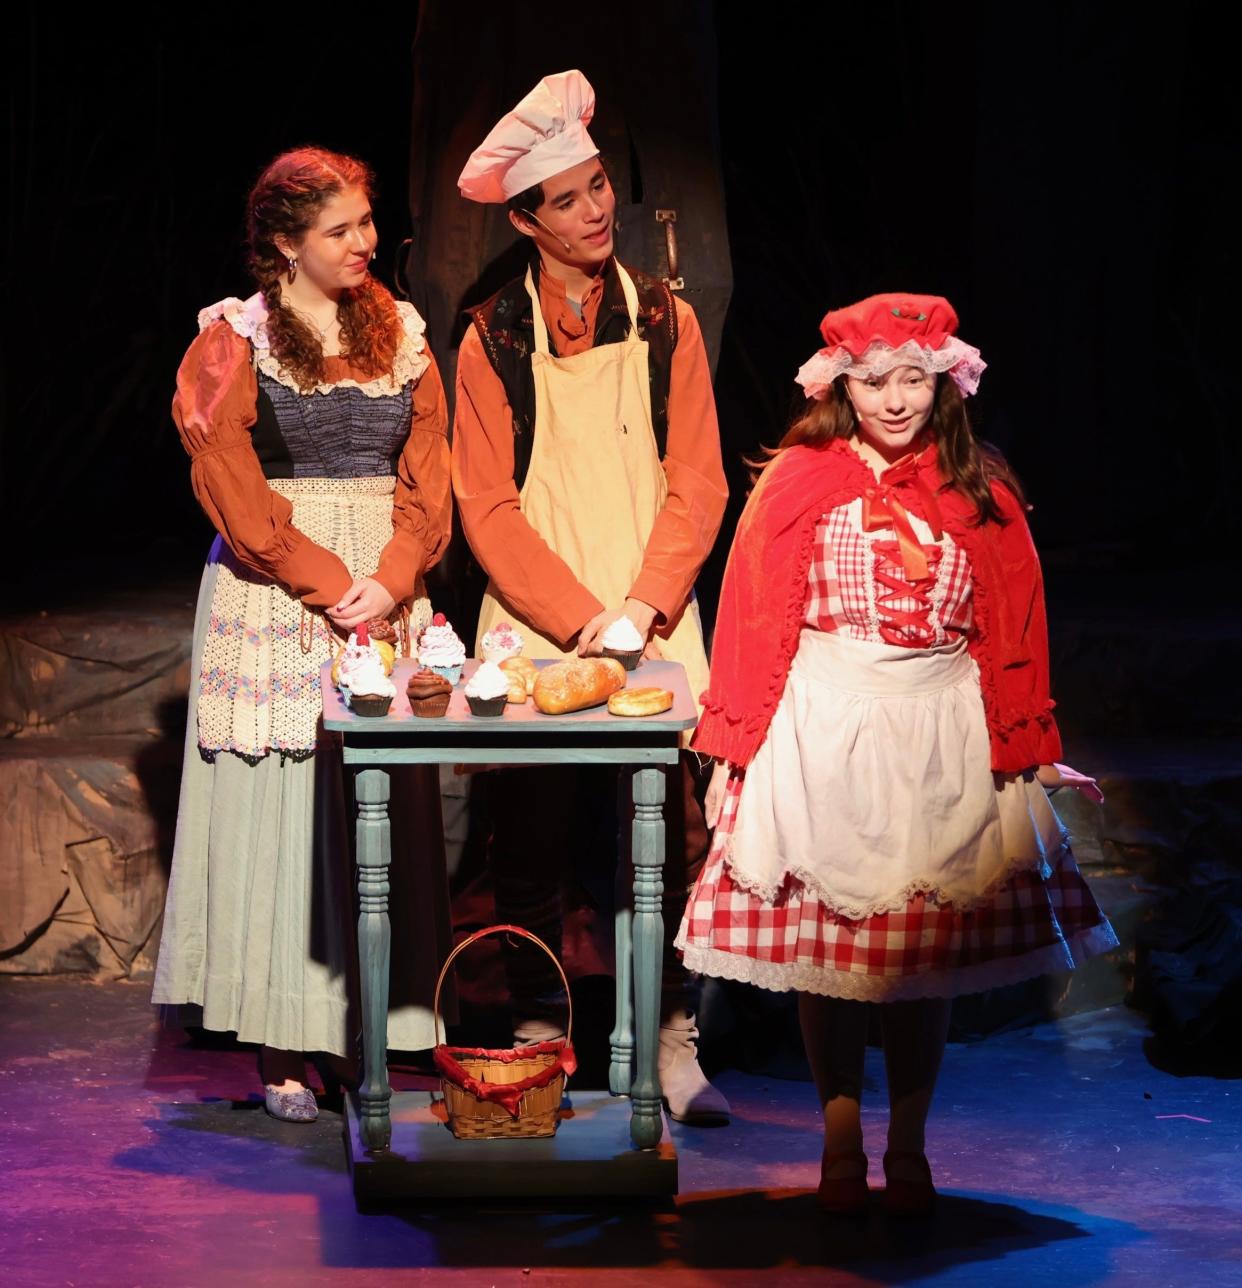 Ava Pursel is The Baker's Wife, Jeremy Tam is The Baker and Kady Finegan is Little Red Ridinghood in Pelham Memorial High School's production of "Into the Woods." Performances at 7:30 p.m., April 12, 13; 2 p.m., April 14.